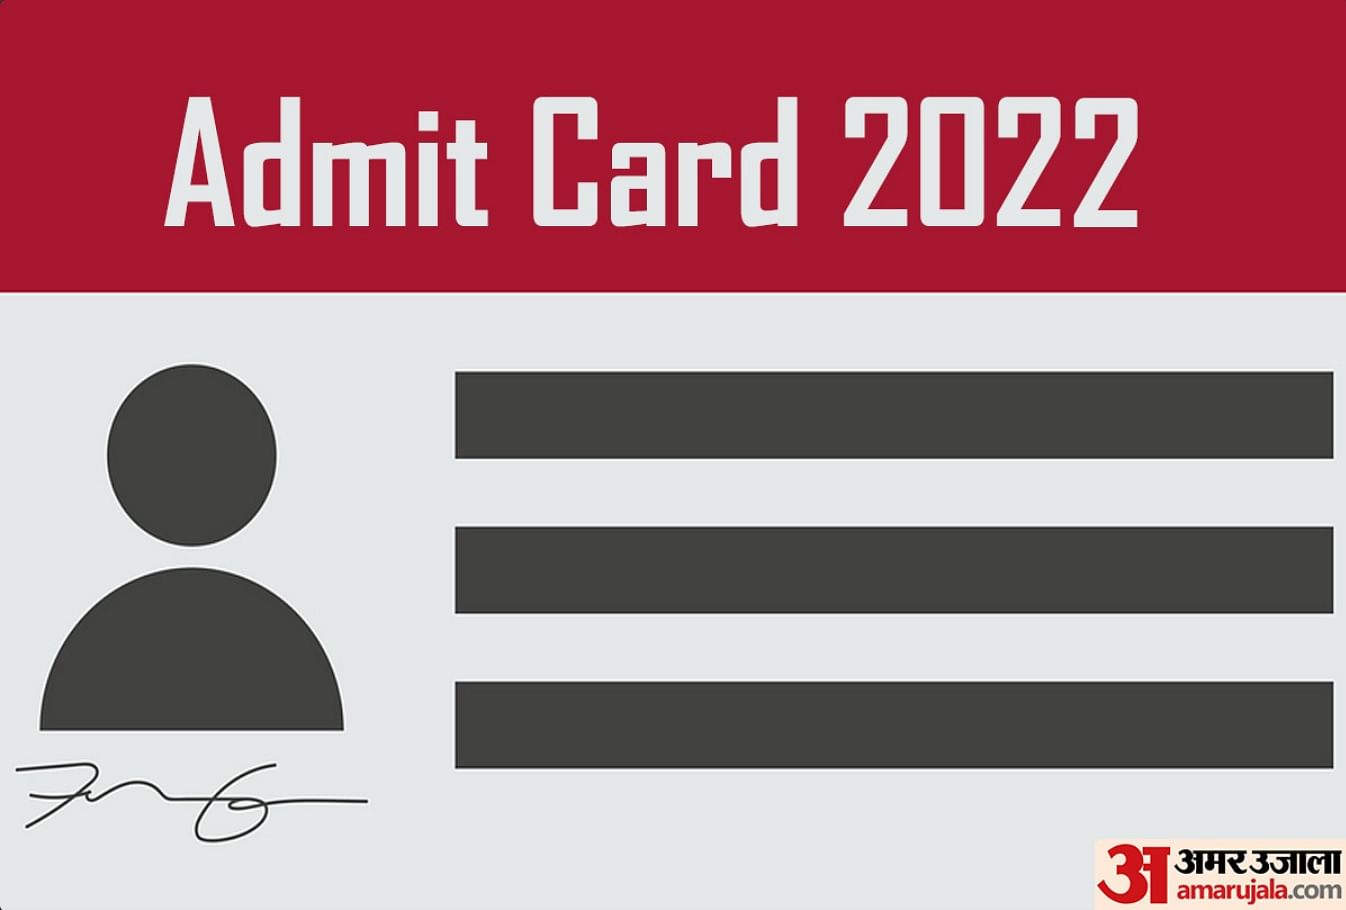 UPRVUNL Admit Card 2022 Out For Junior Engineer And Other Posts, Direct Link to Download Here